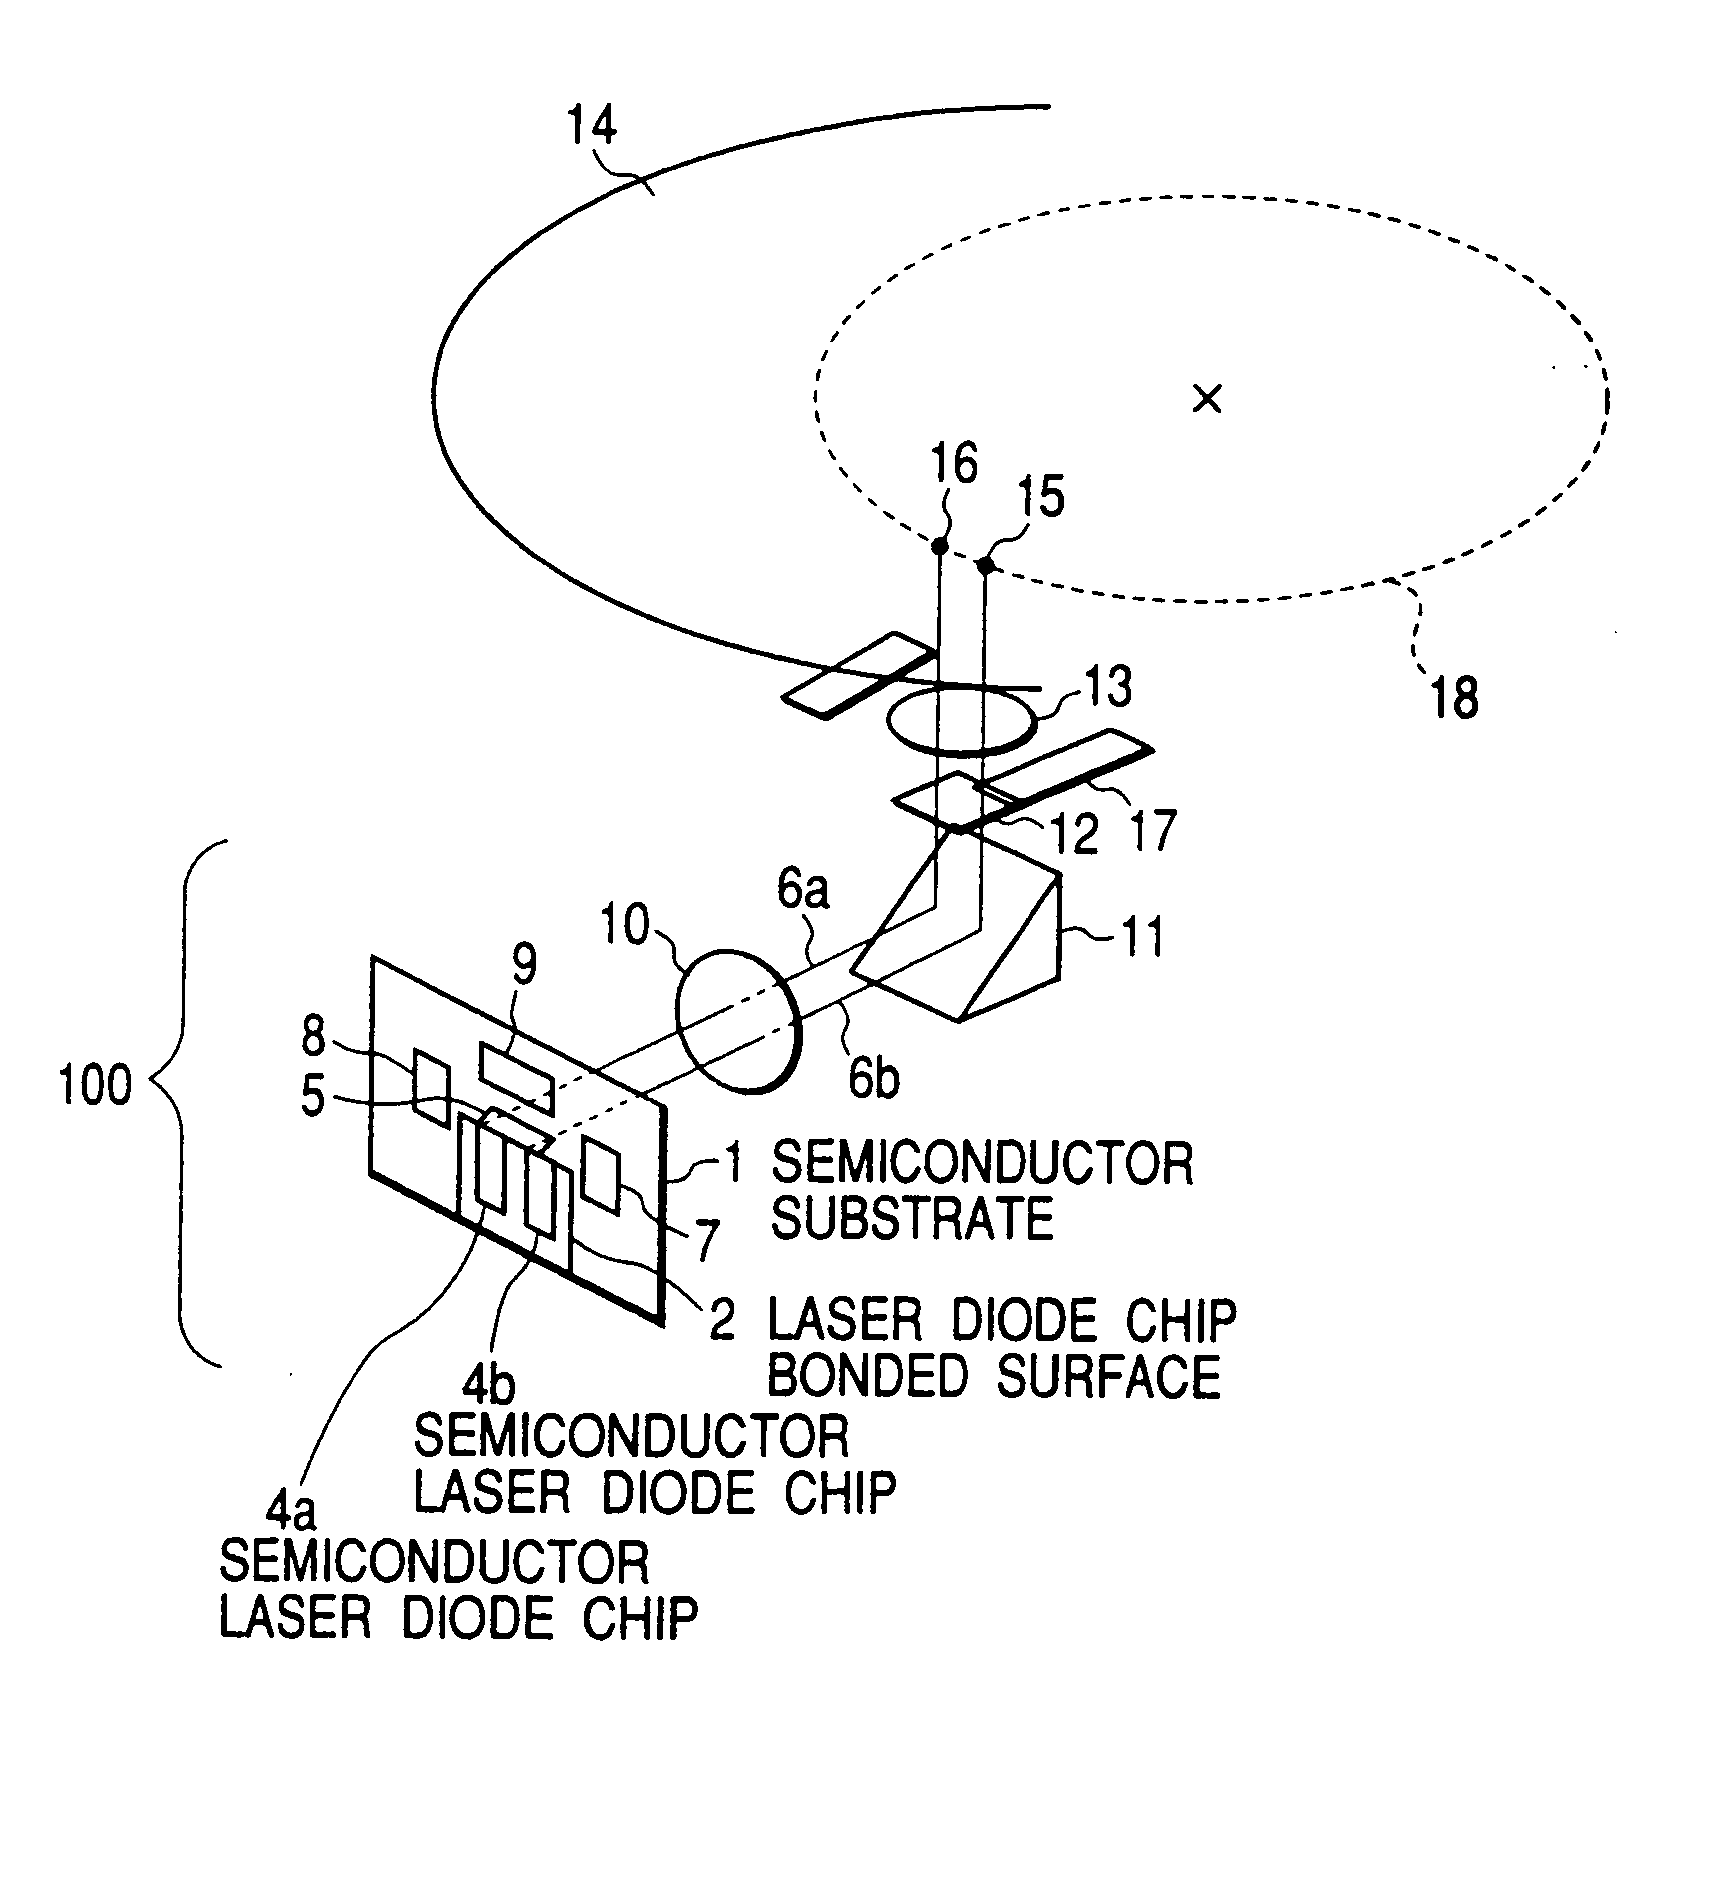 Optical head with lasers and mirrors in a recess formed in a substrate